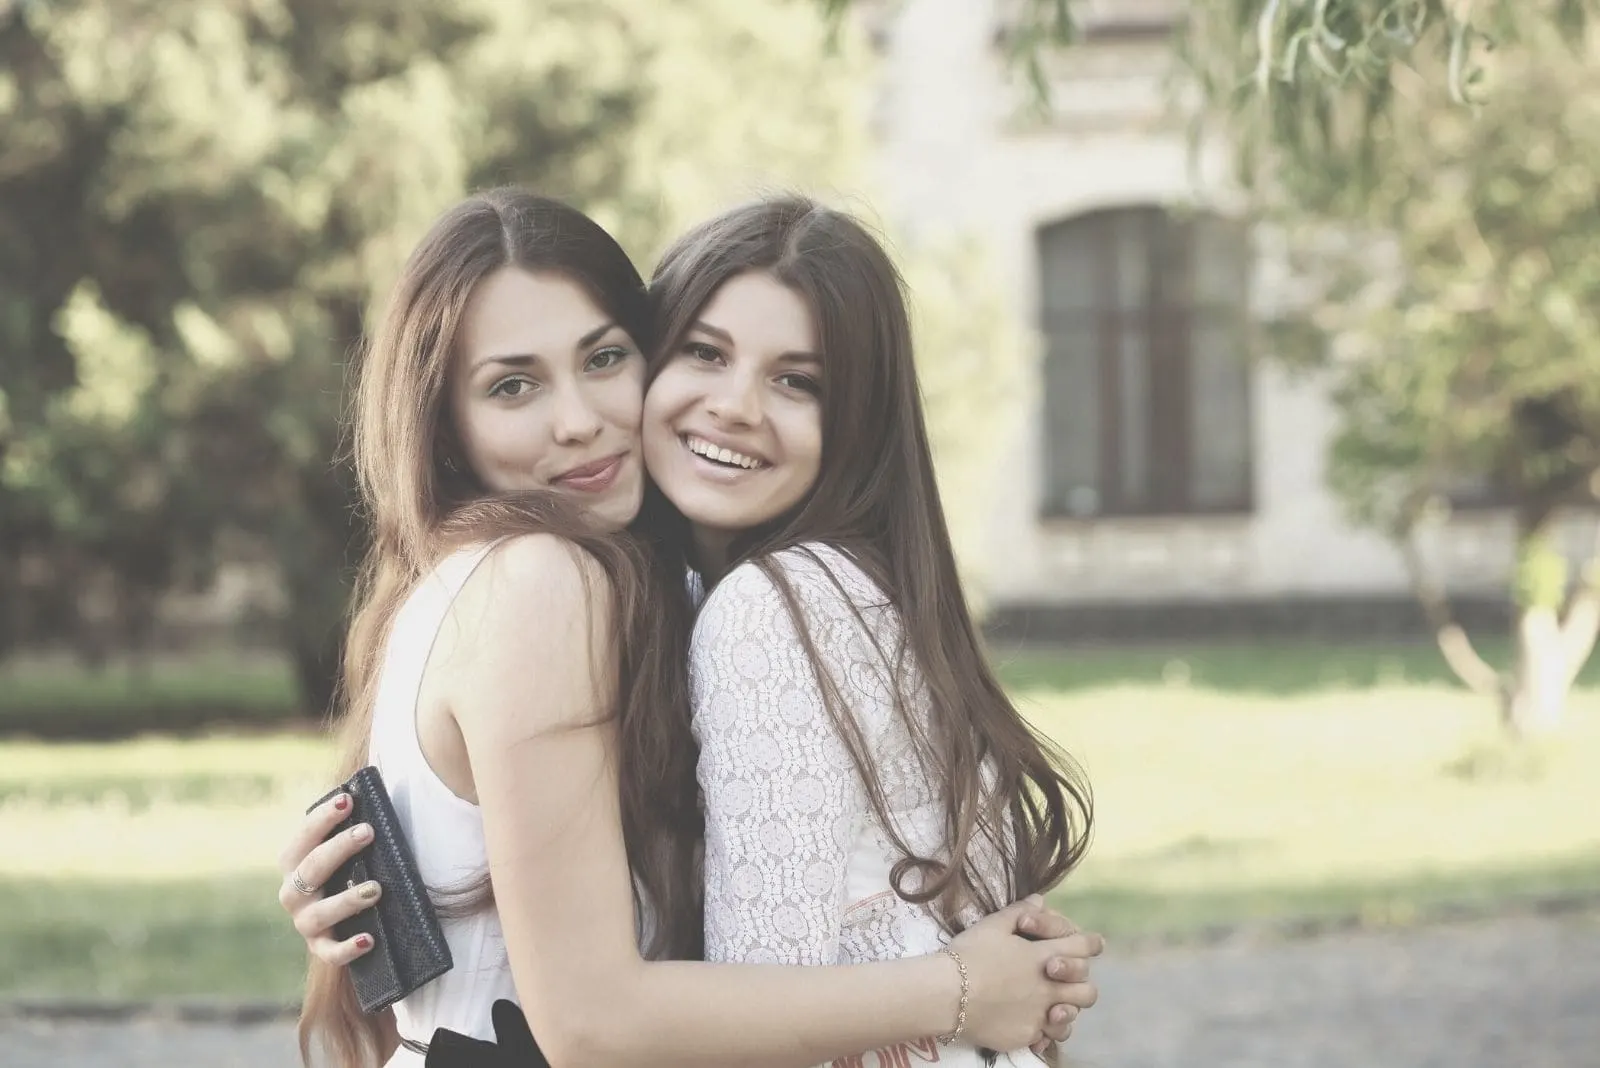 girlfriends hugging outdoors looking at the camera and smiling